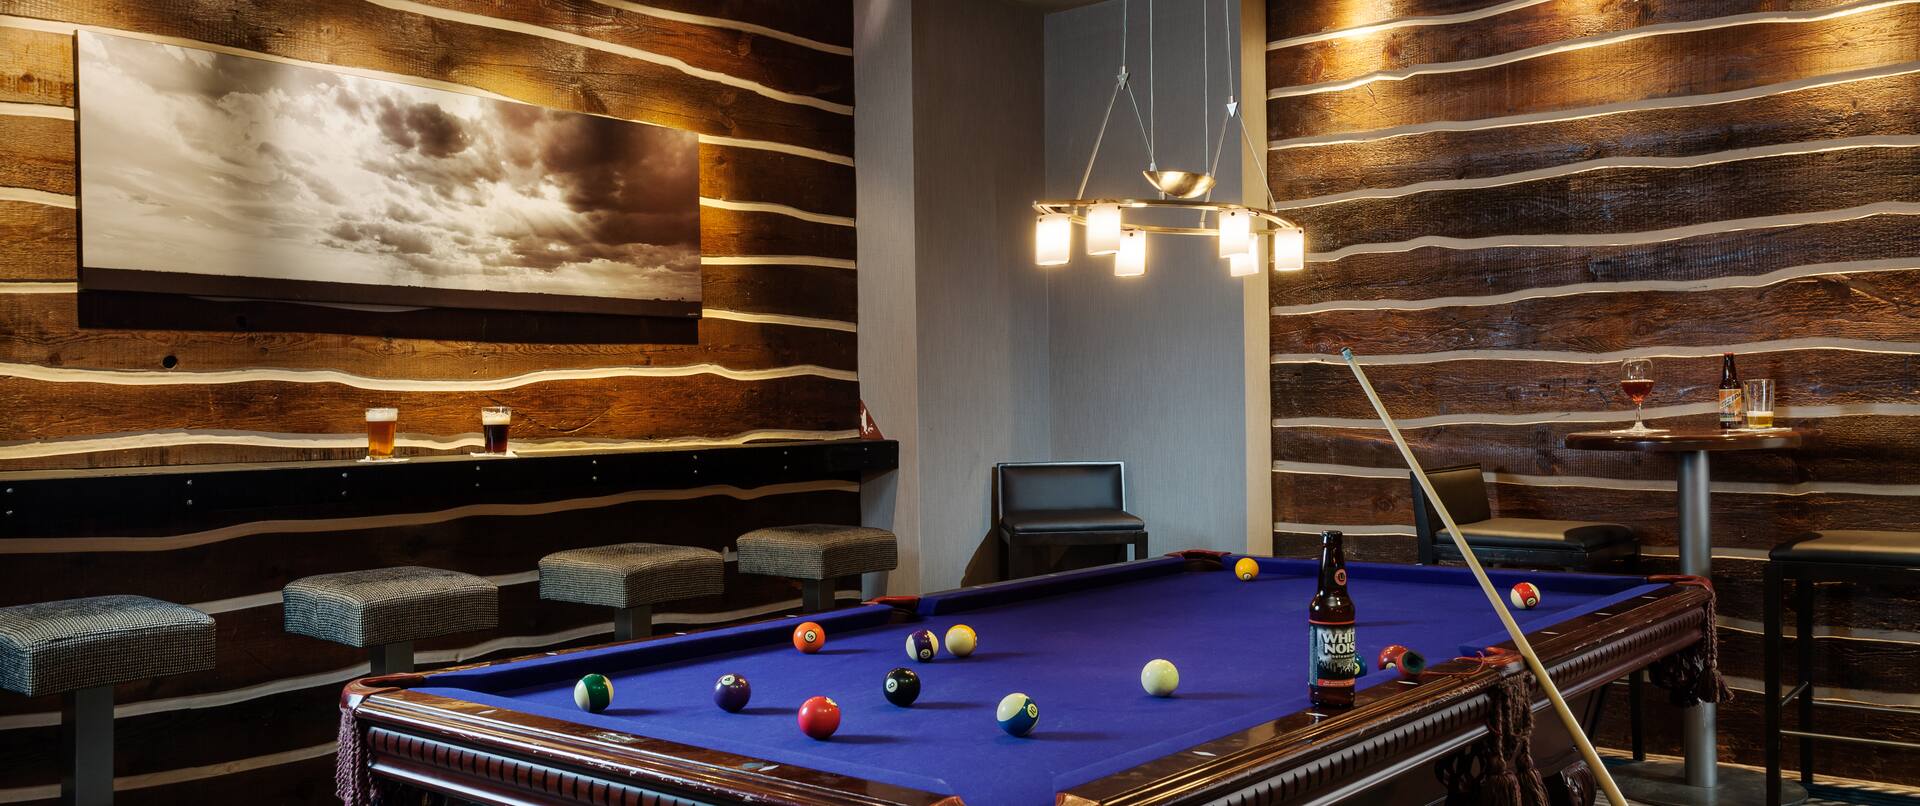 Montana's Lounge With Wall Art Above Counter Seating, Bar Table, Chairs and Pool Table